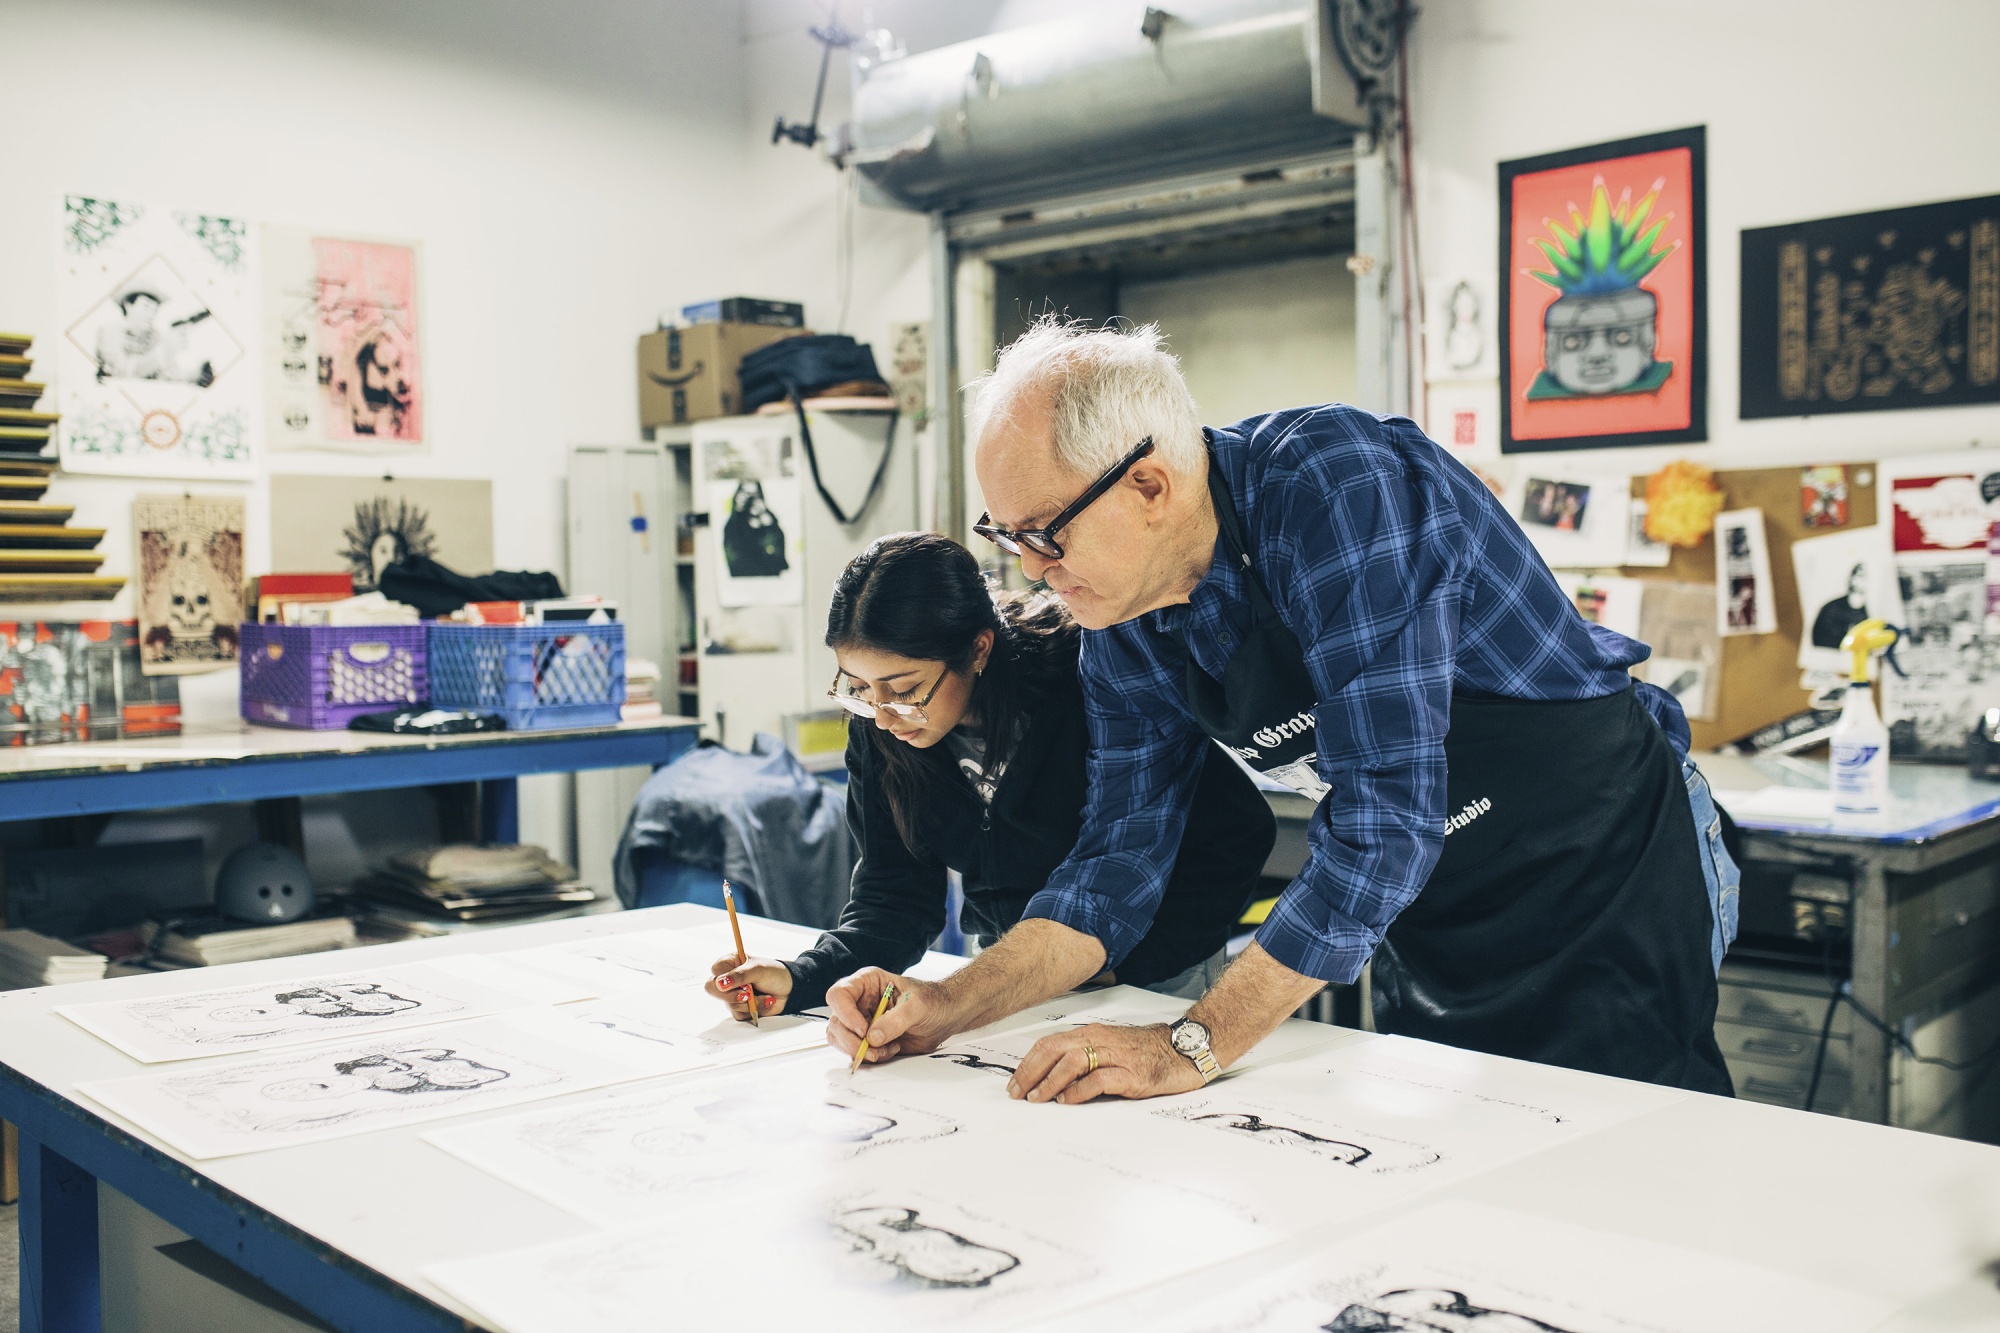 This image released by PBS shows actor John Lithgow, right, with Yoli, as they work on a screen print drawing during the filming of &quot;Art Happens Here With John Lithgow,&quot; premiering April 26. (Antonio Diaz/PBS SoCal via AP)